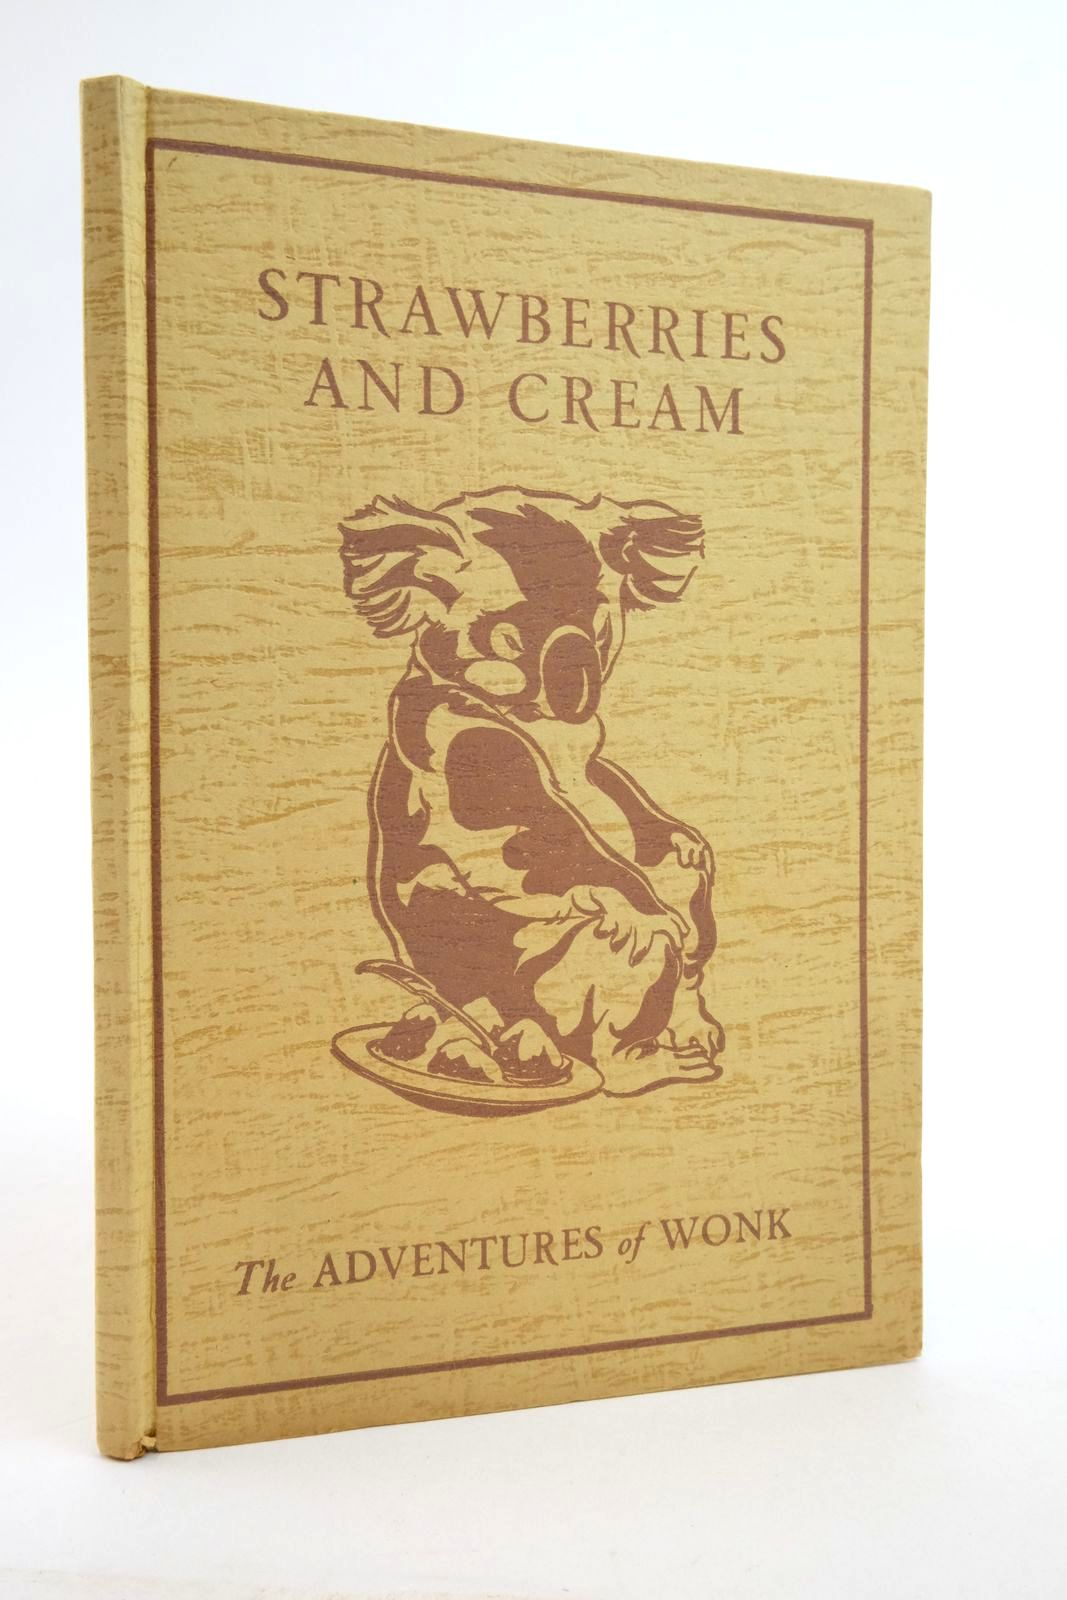 Photo of THE ADVENTURES OF WONK - STRAWBERRIES AND CREAM written by Levy, Muriel illustrated by Kiddell-Monroe, Joan published by Wills & Hepworth Ltd. (STOCK CODE: 2136918)  for sale by Stella & Rose's Books